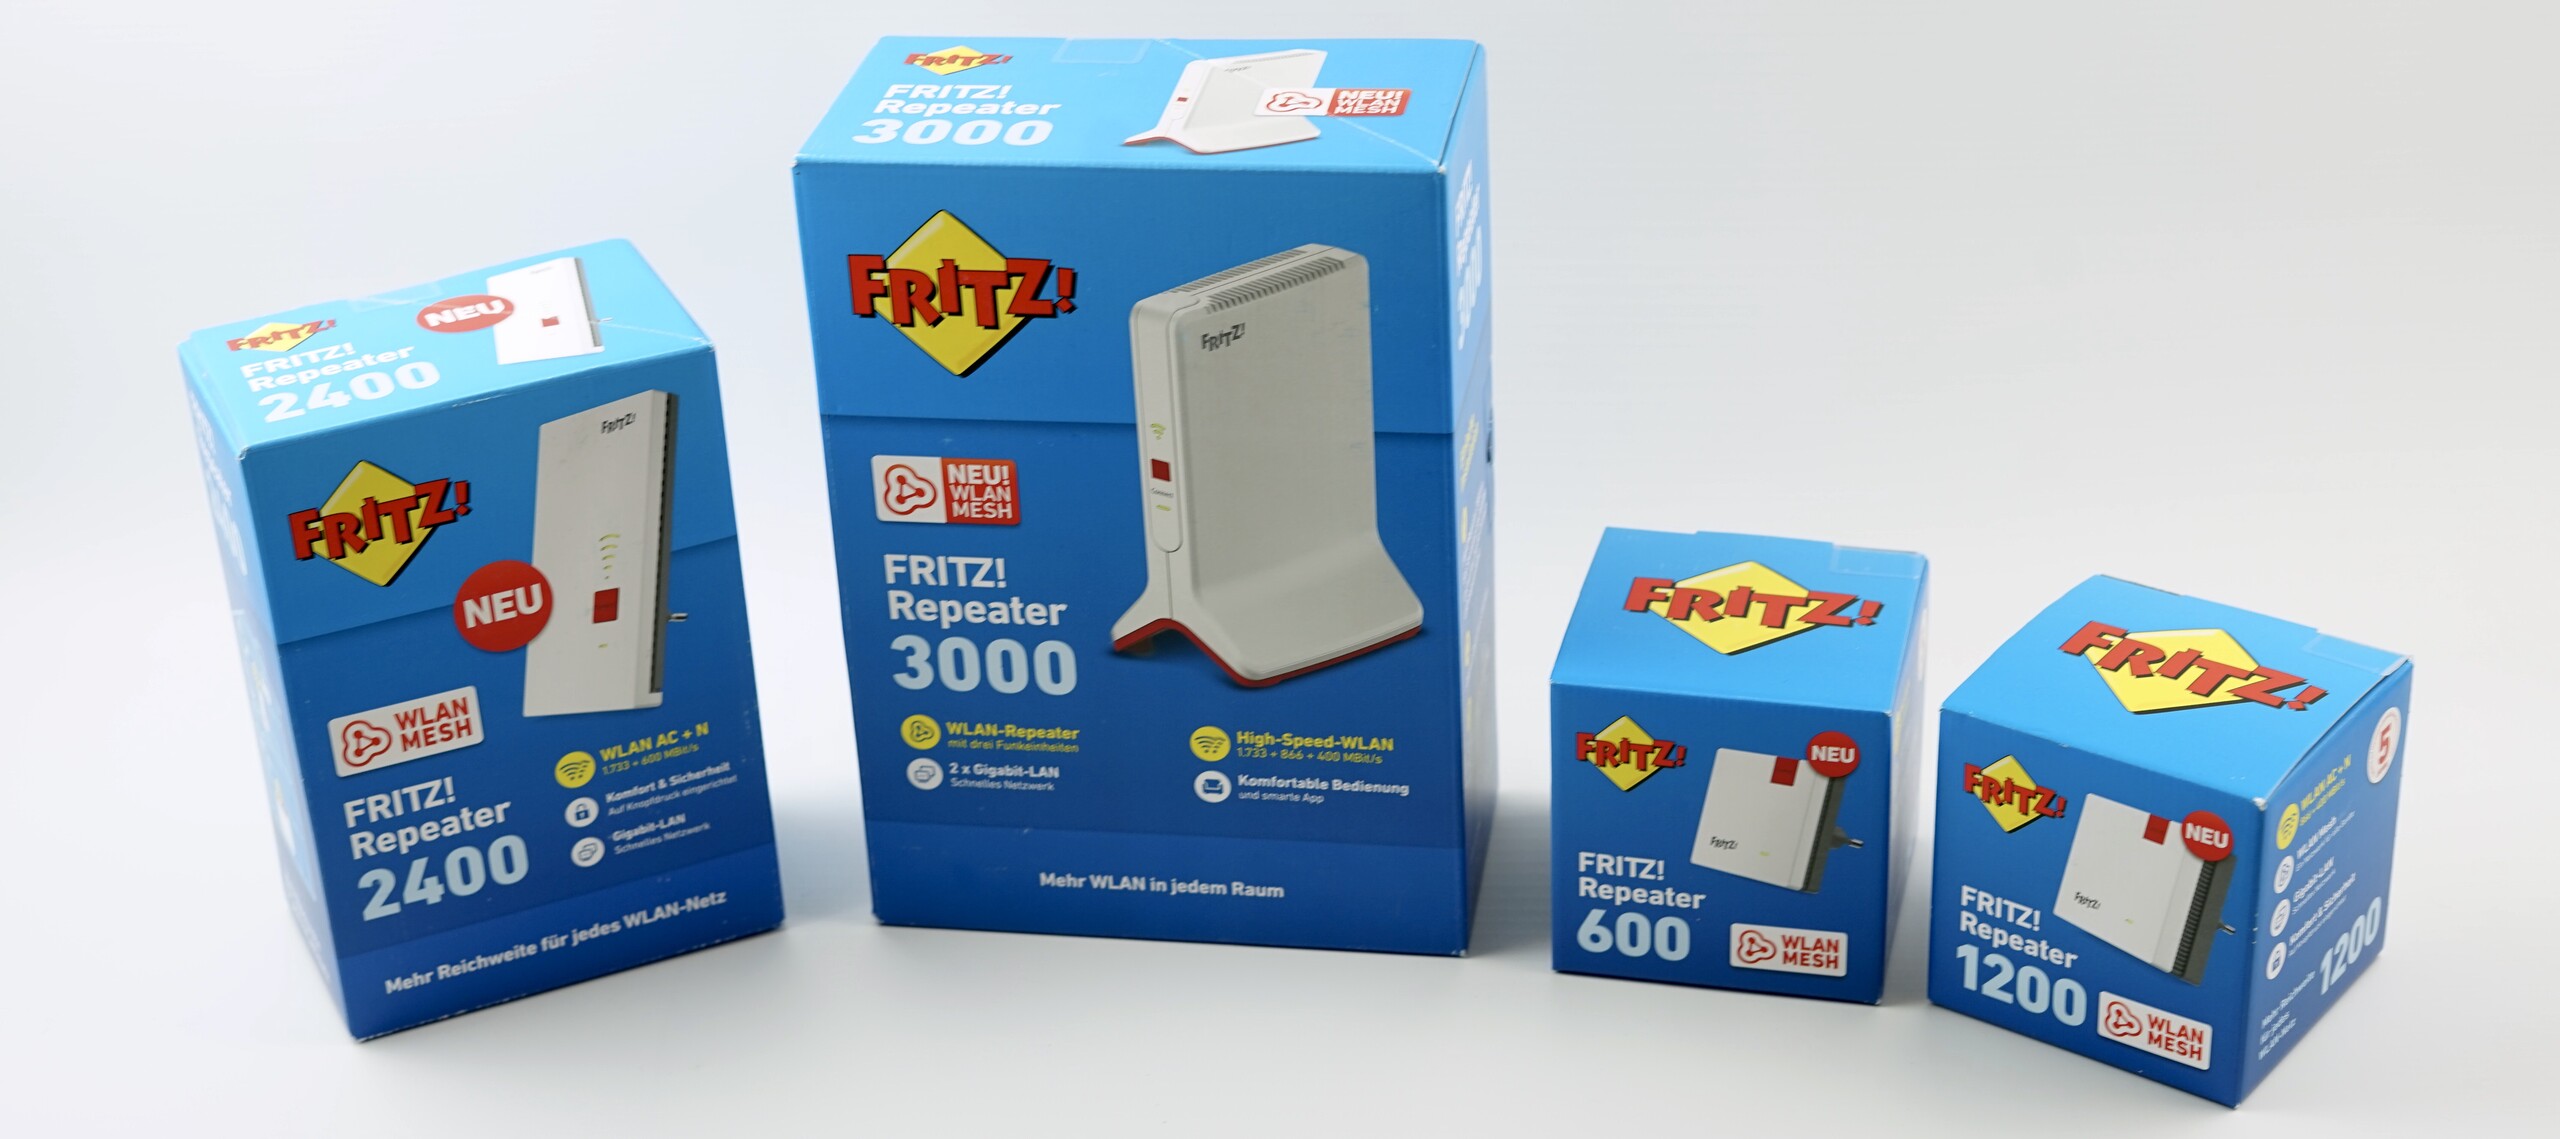 Fritz! 3000 and 600, NotebookCheck.net AVM Reviews WLAN Repeater Review 2000 1200, - 1750E,